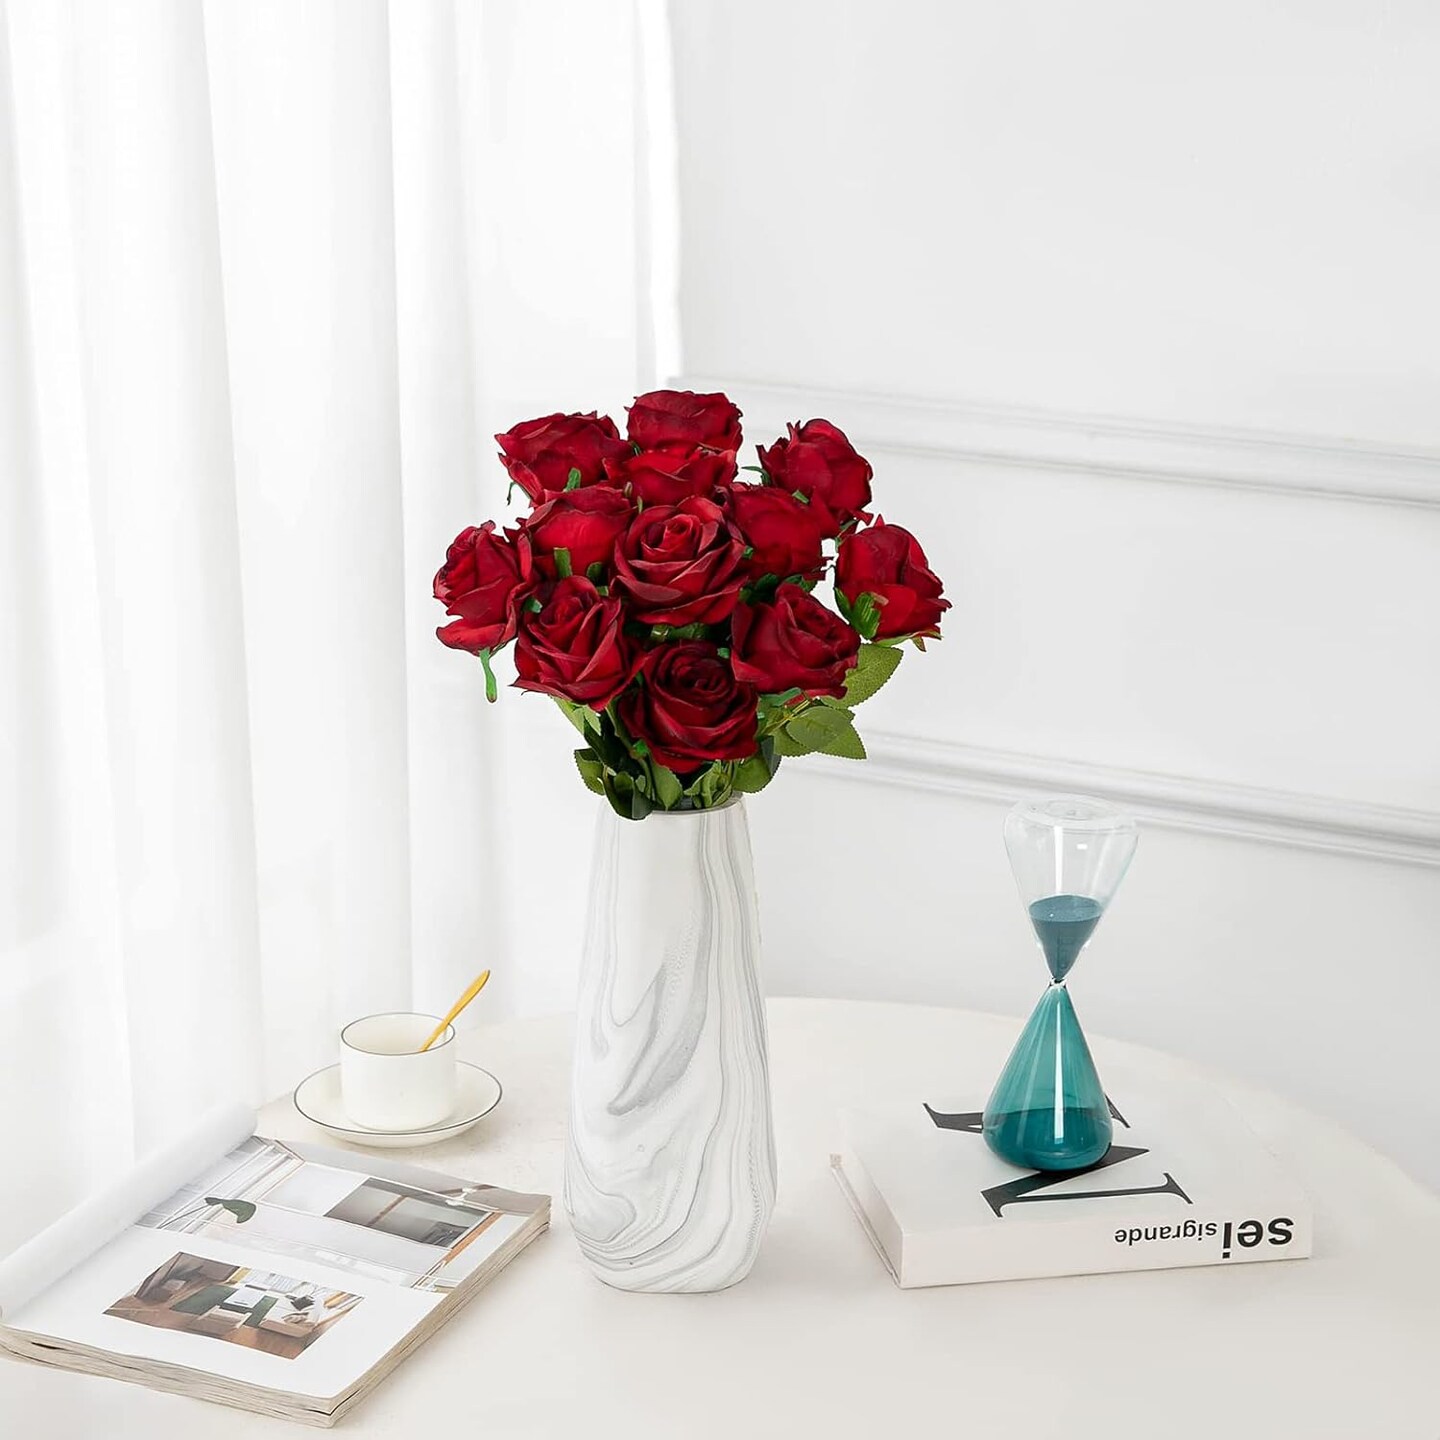 12 Pcs Long Lush Stem Roses Perfect for Every Occasion